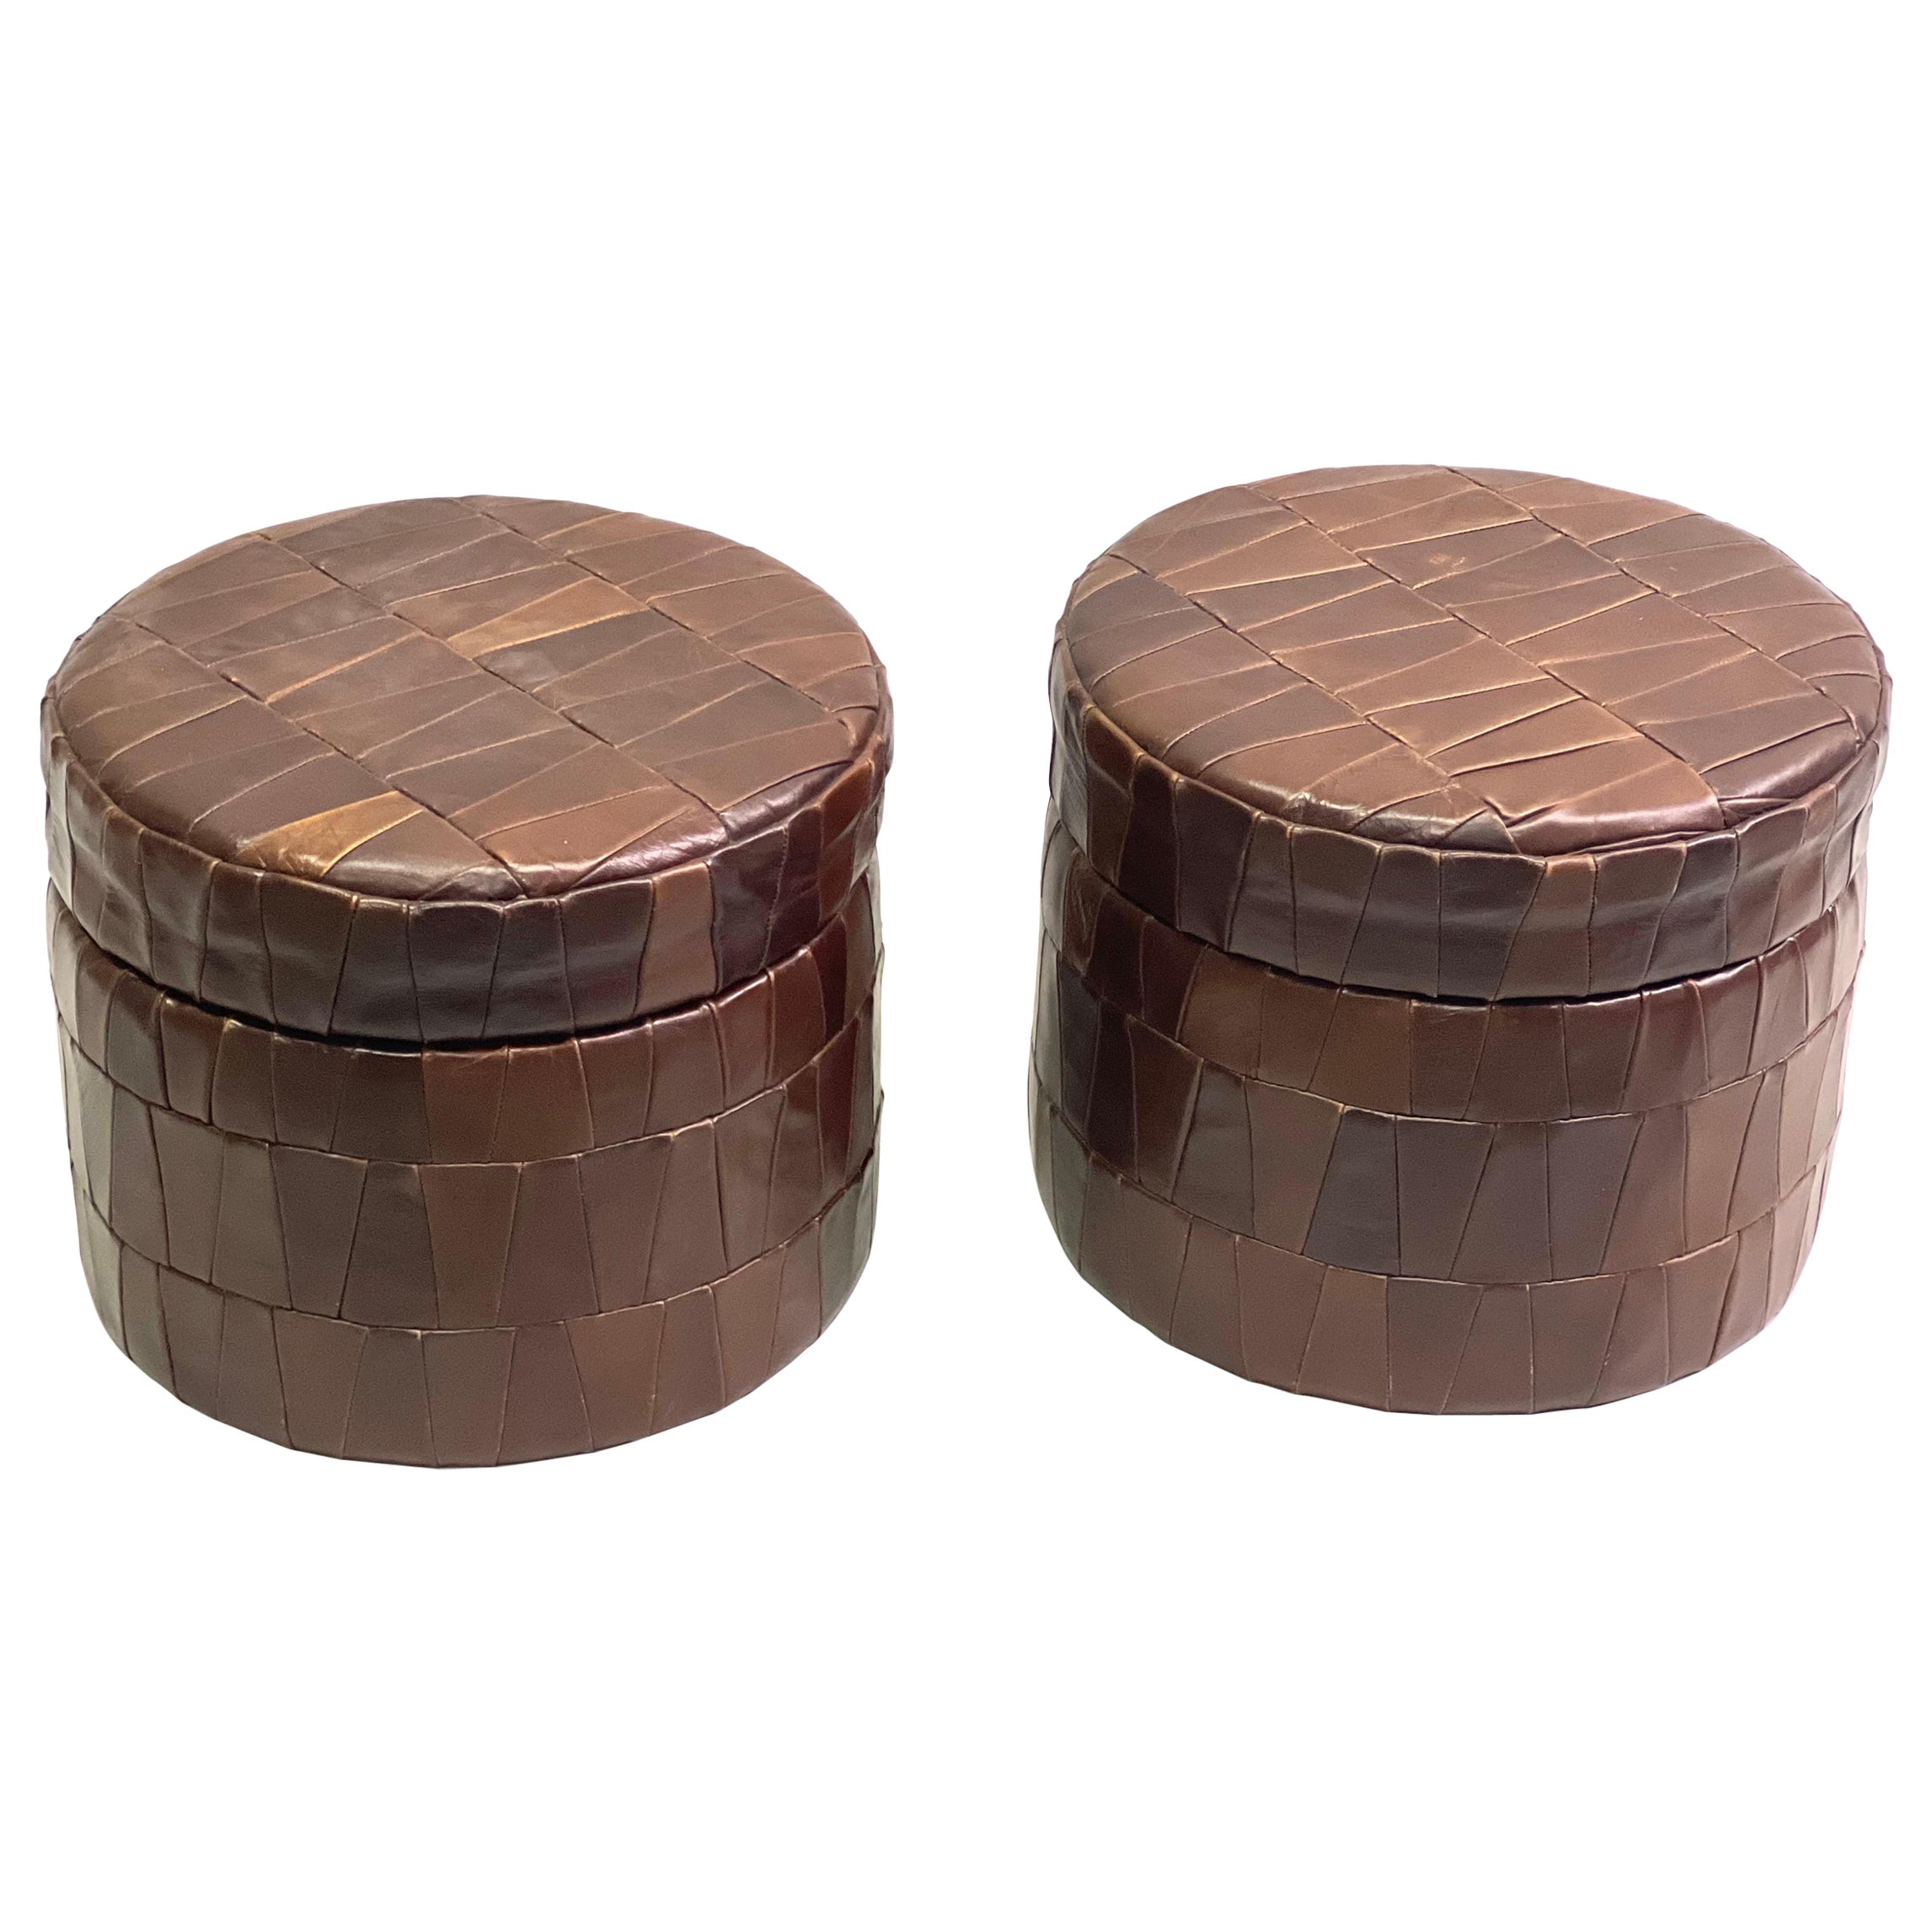 Pair of Swiss Modern Patchwork Leather Storage Ottomans/ Stools by De Sede, 1960 For Sale